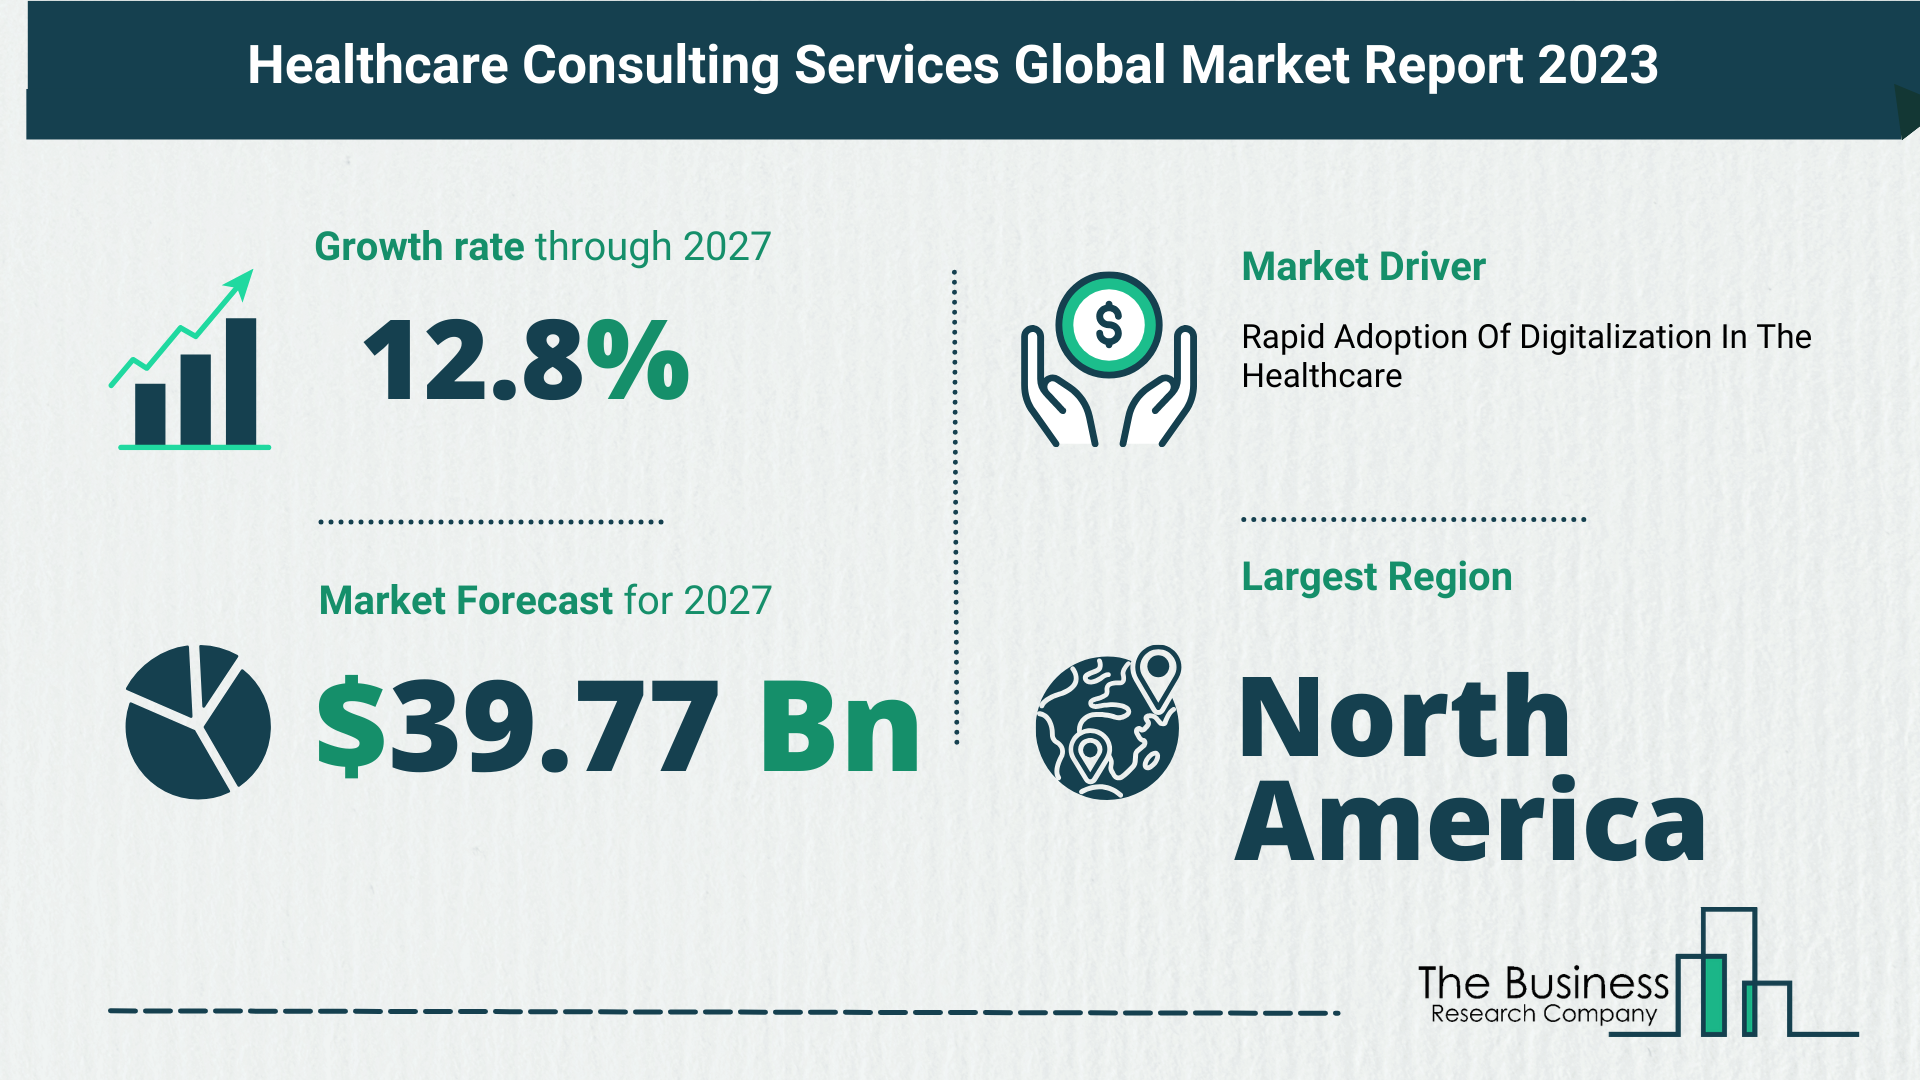 Global Healthcare Consulting Services Market